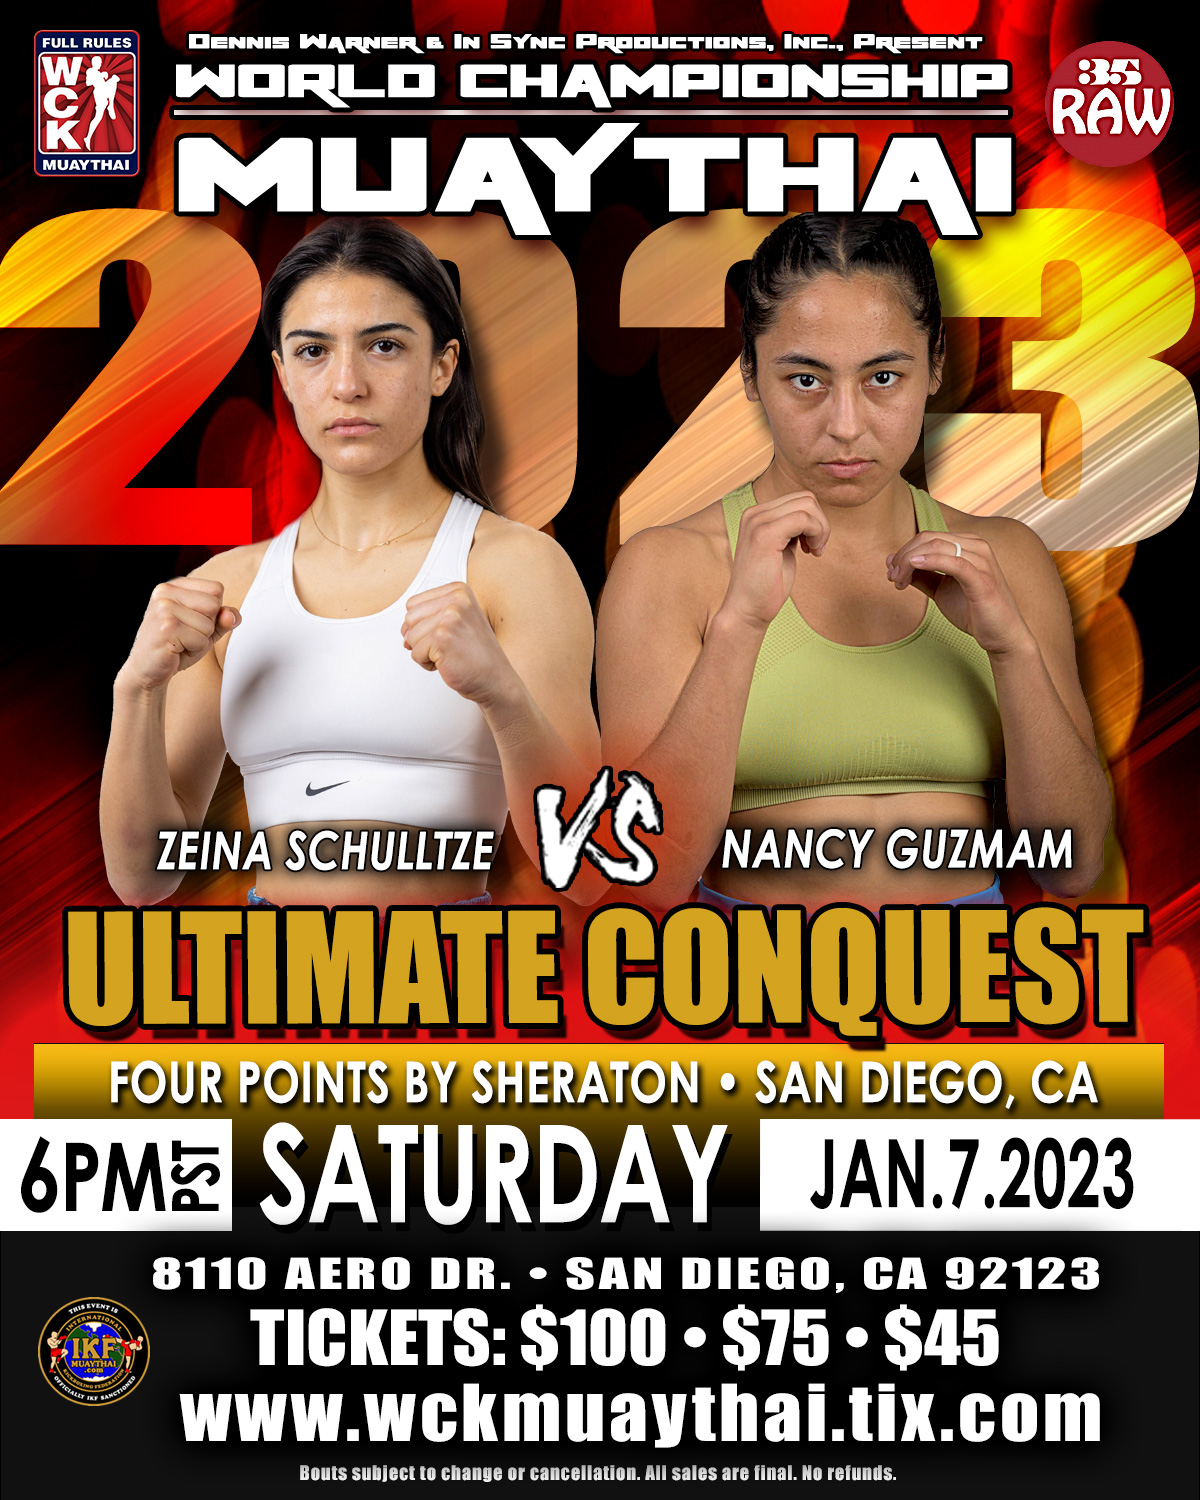 WCK ULTIMATE CONQUEST January 7th, 2023 Four Points by Sheraton, CA – WCK  FULL RULES MUAYTHAI